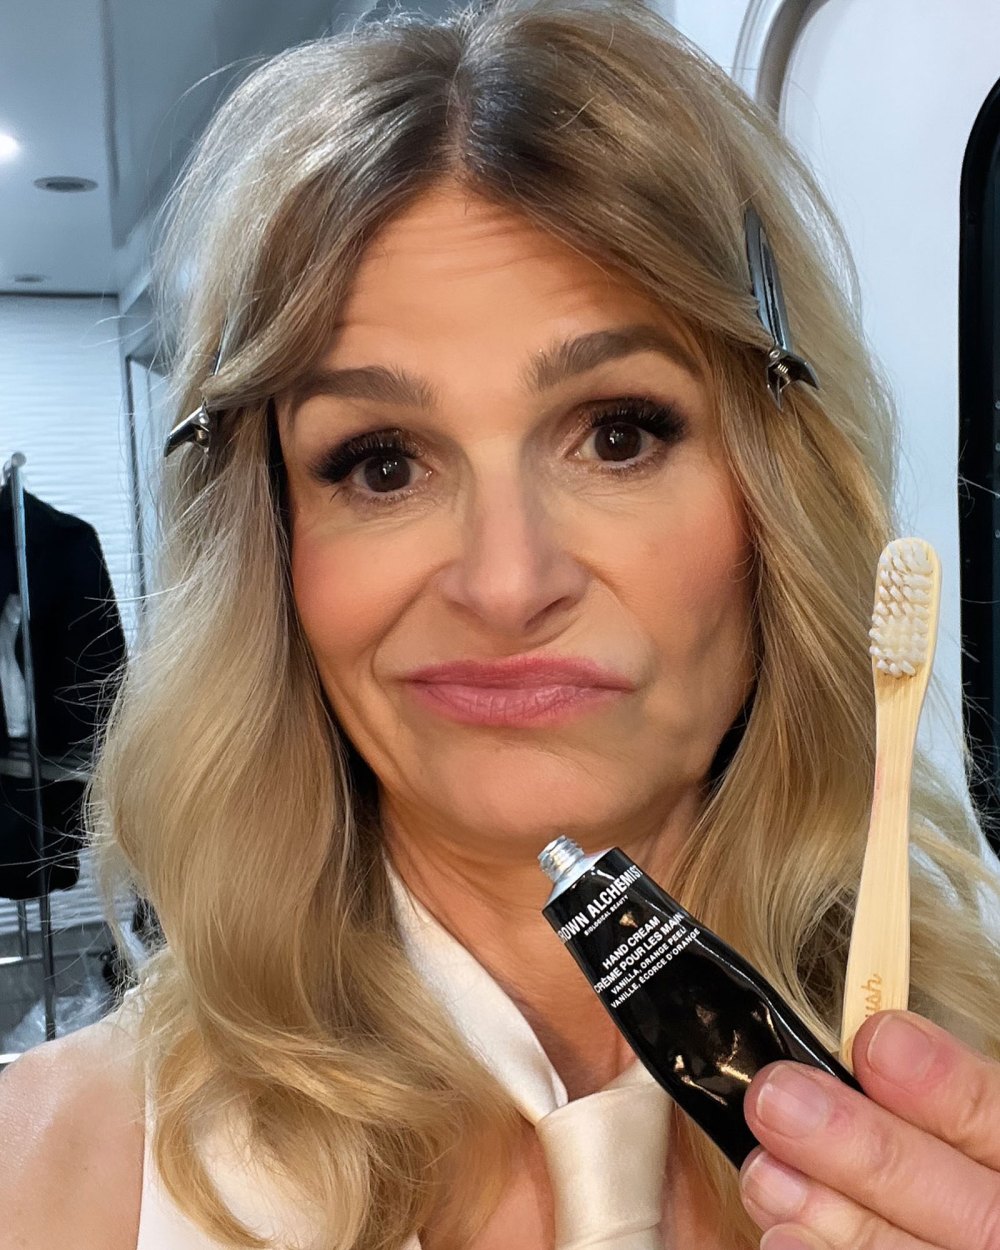 Kyra Sedgwick Accidentally Brushes Her Teeth With Hand Cream